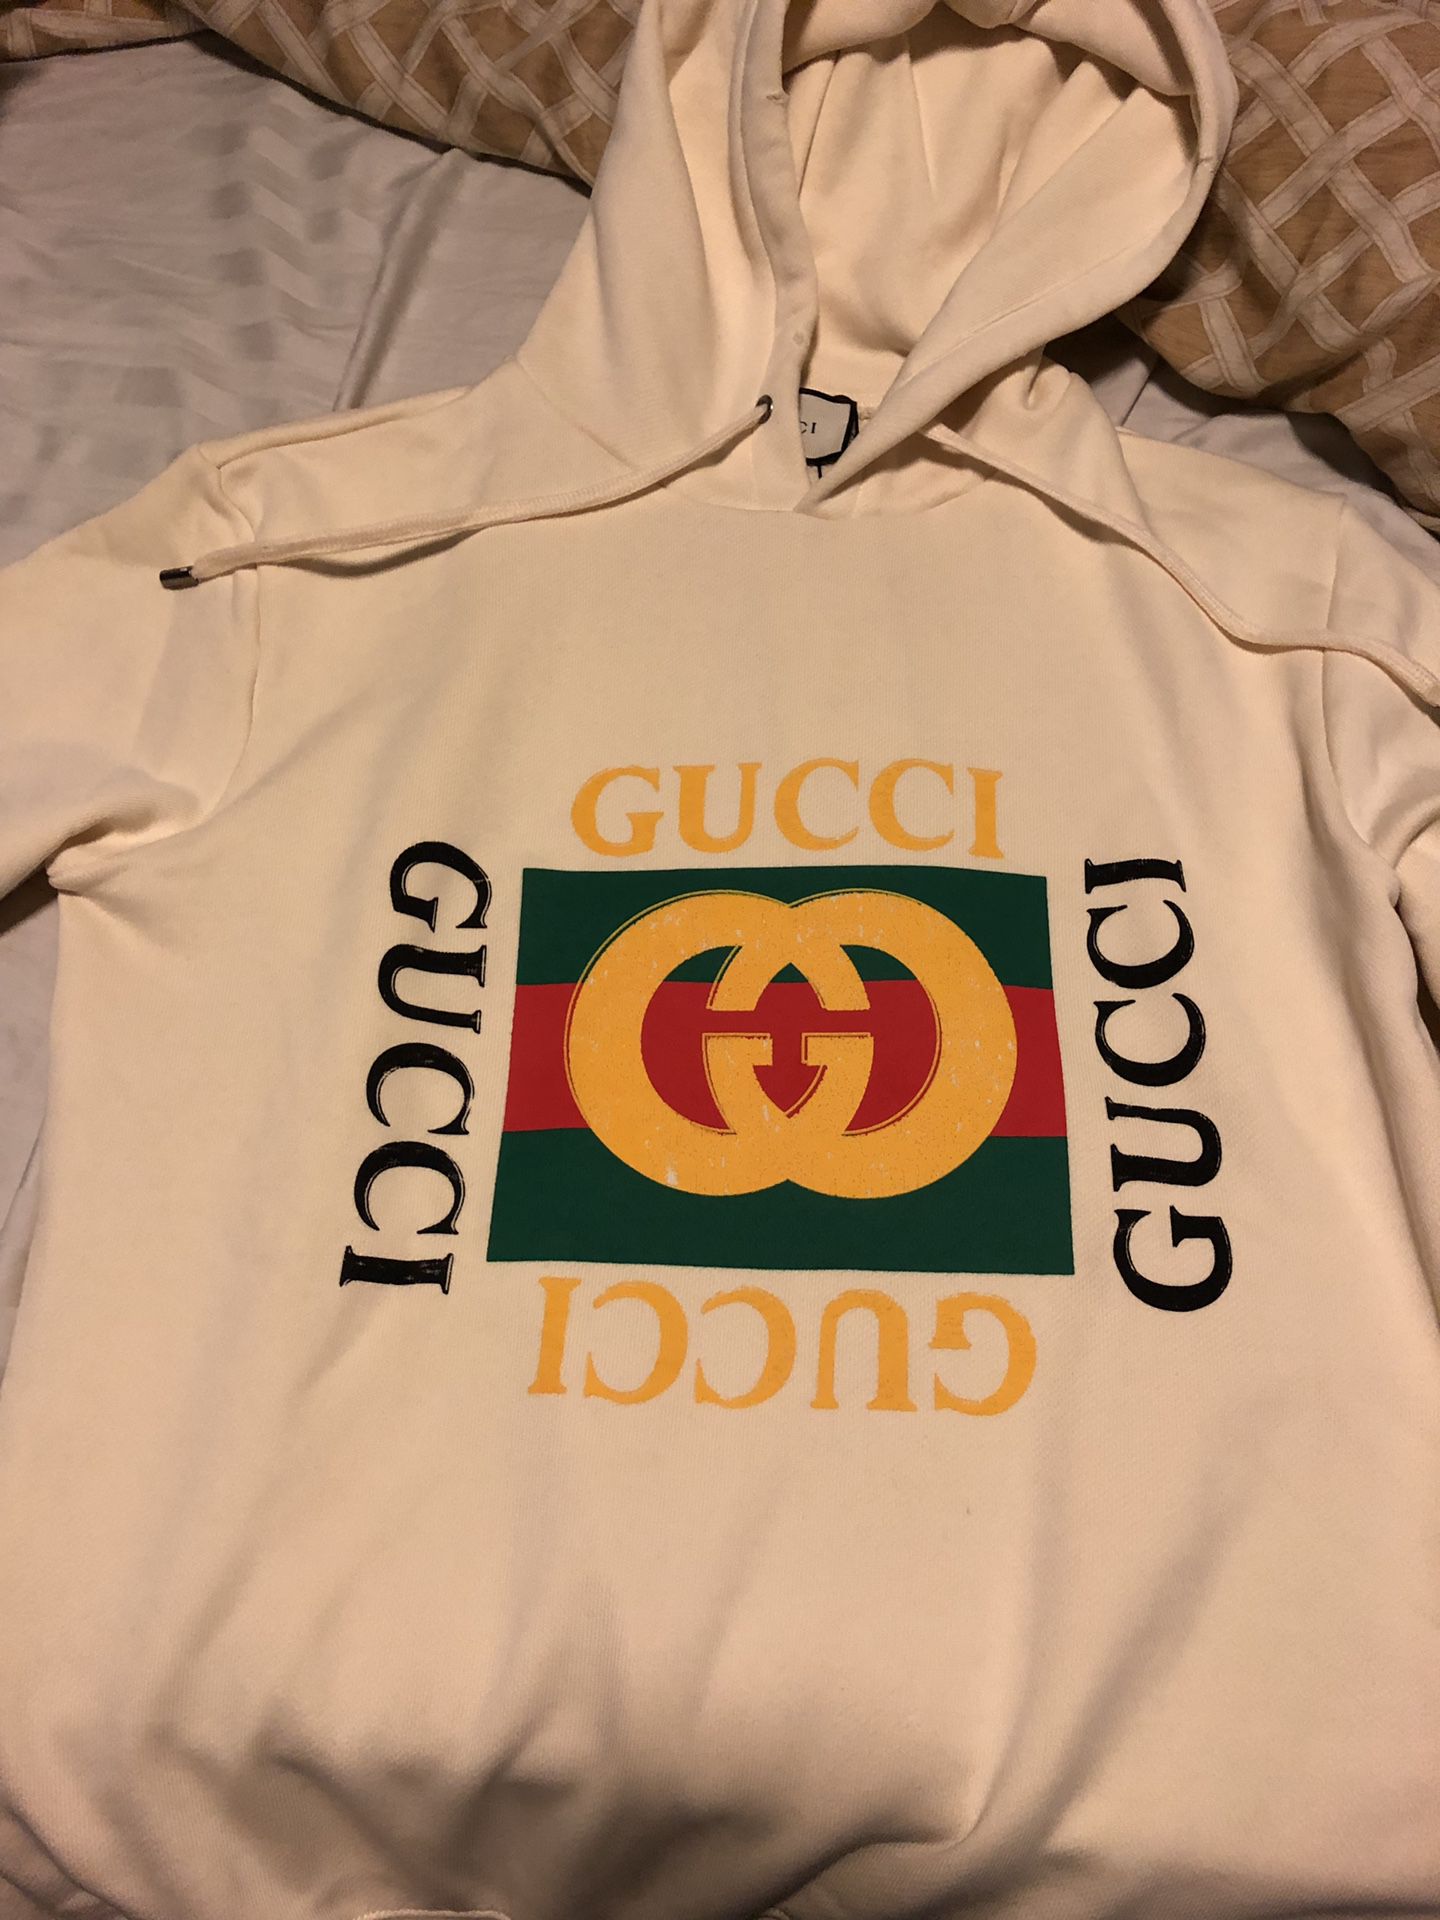 Kong Lear Habitat Udover Gucci Brand New oversized Sweatshirt/Hoodie WITH RECEIPT AUTHENTIC for Sale  in Cedar Park, TX - OfferUp